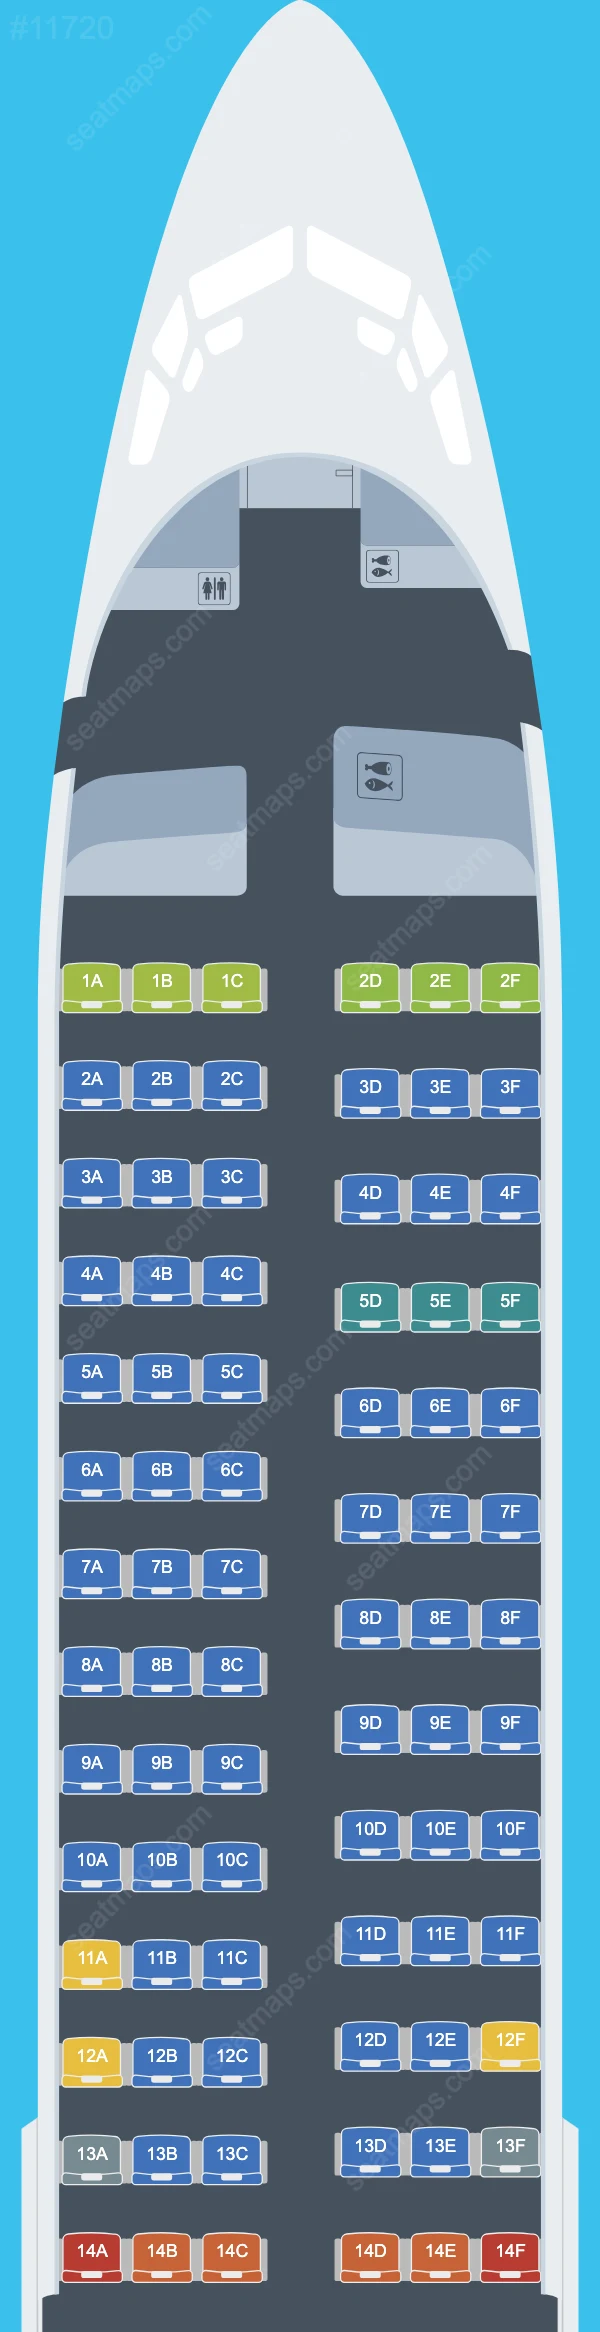 SkyUp MT Boeing 737-800 seatmap preview